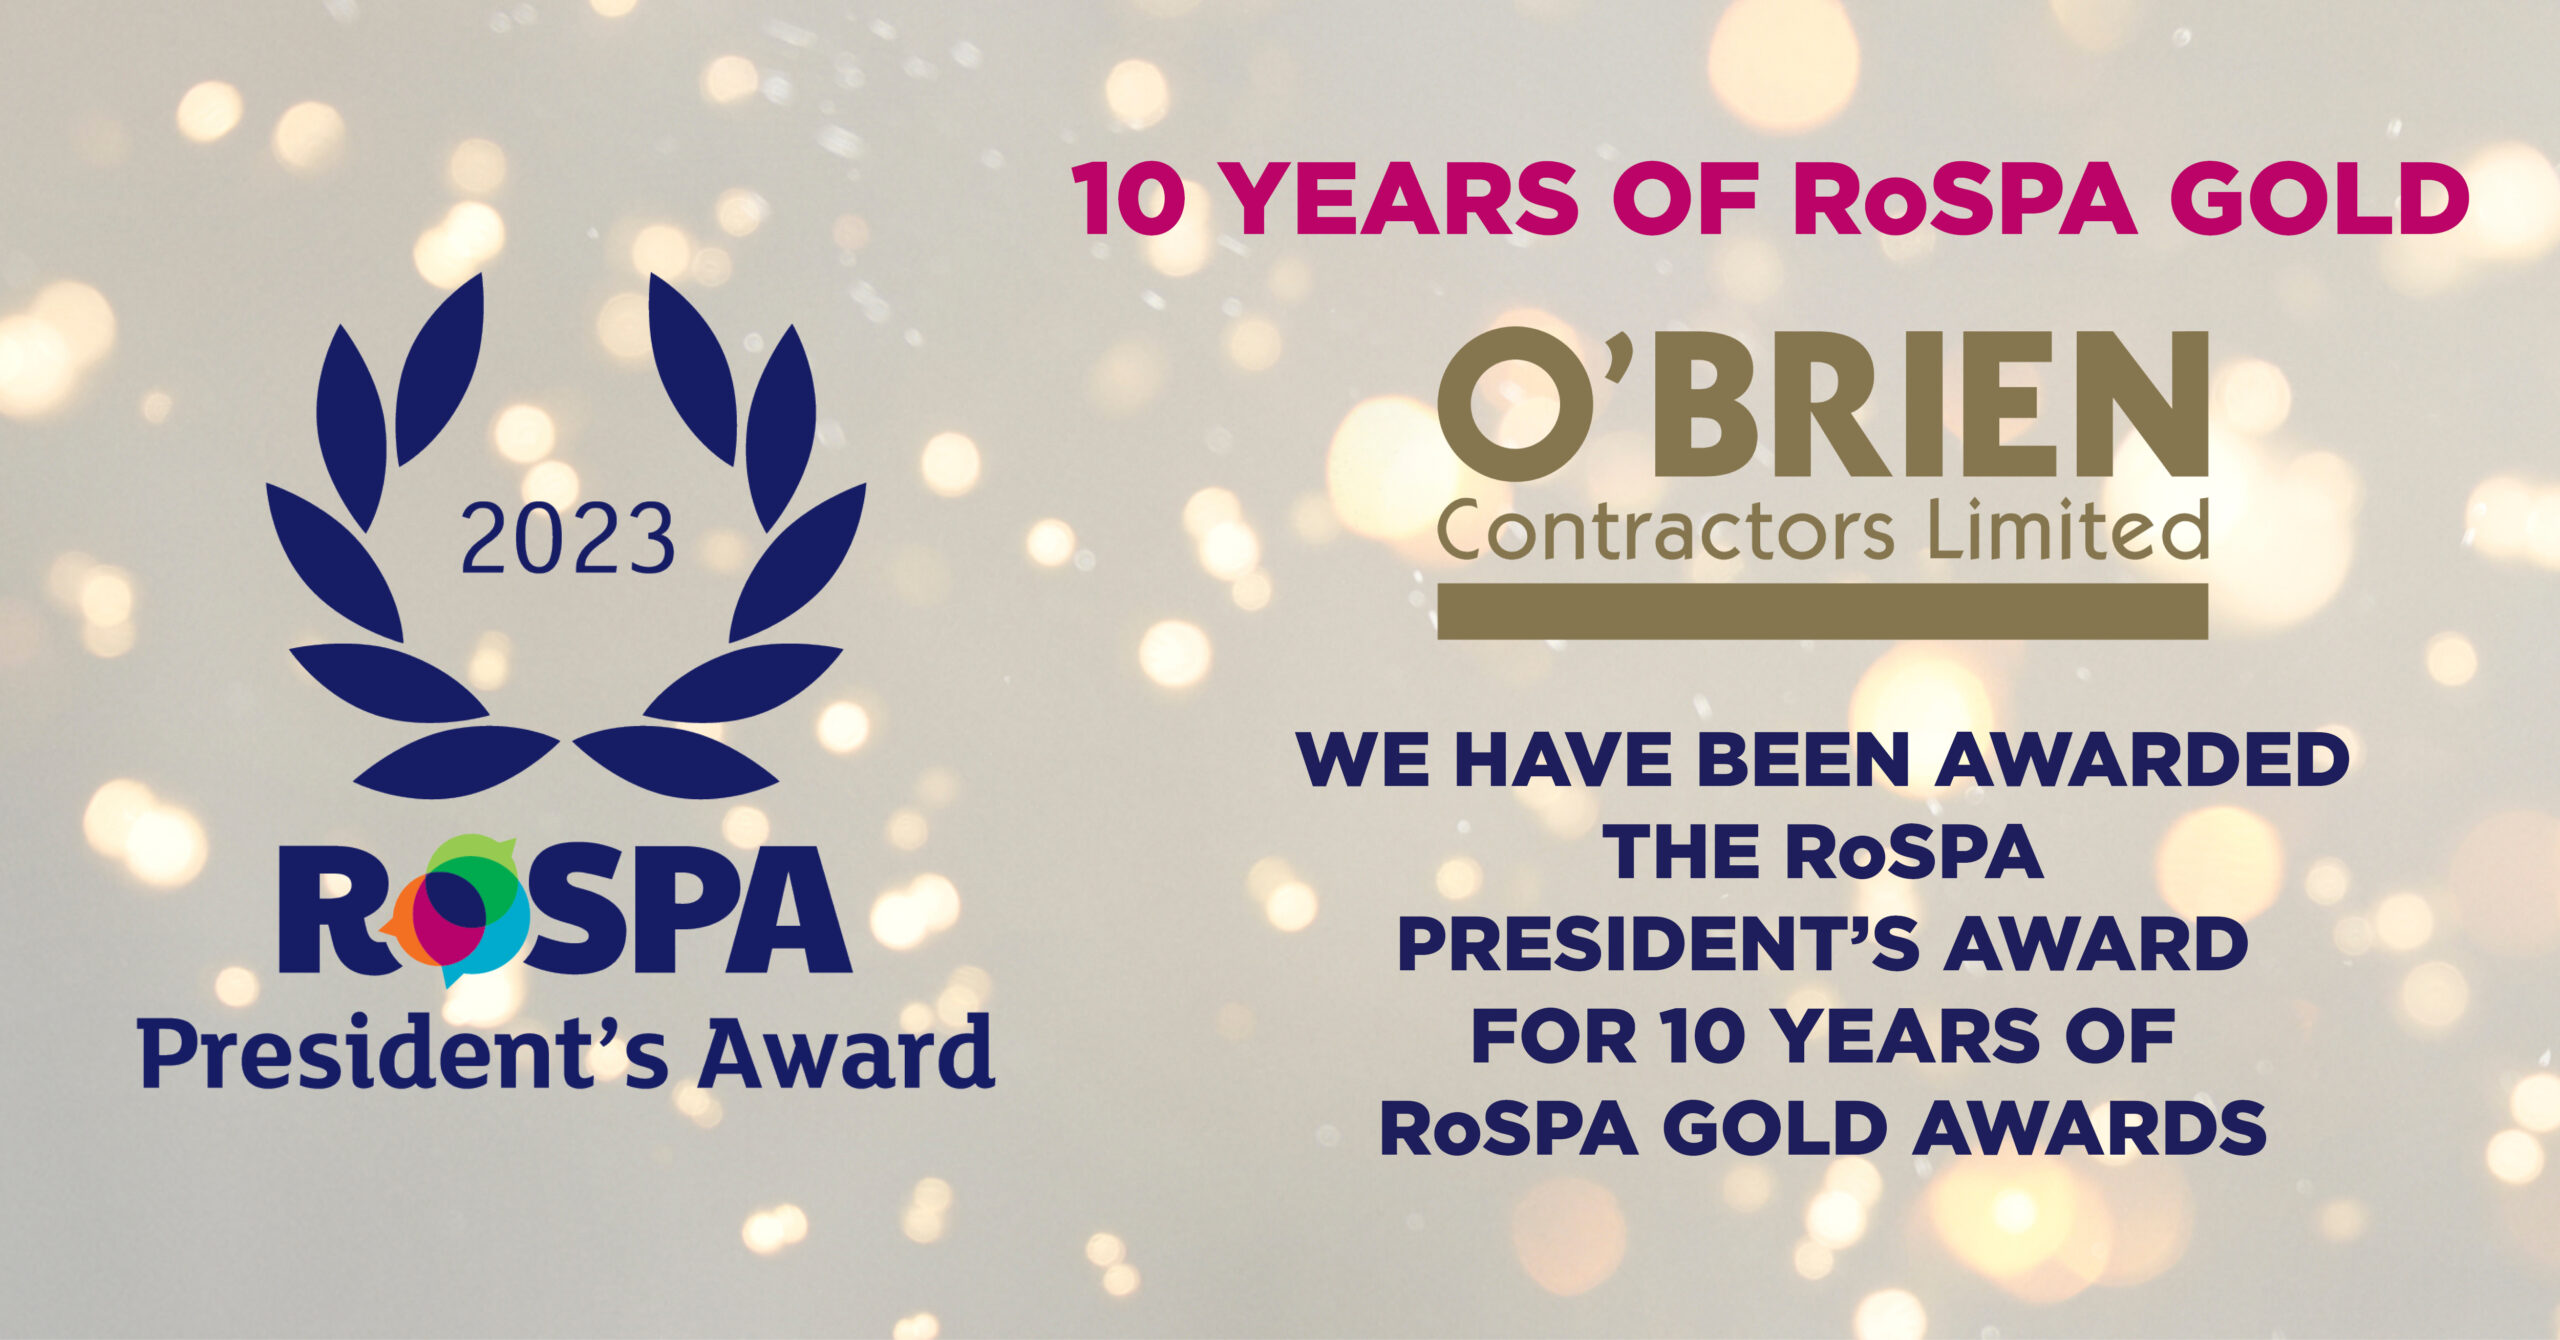 RoSPA President’s Award for 10 Years of RoSPA Gold